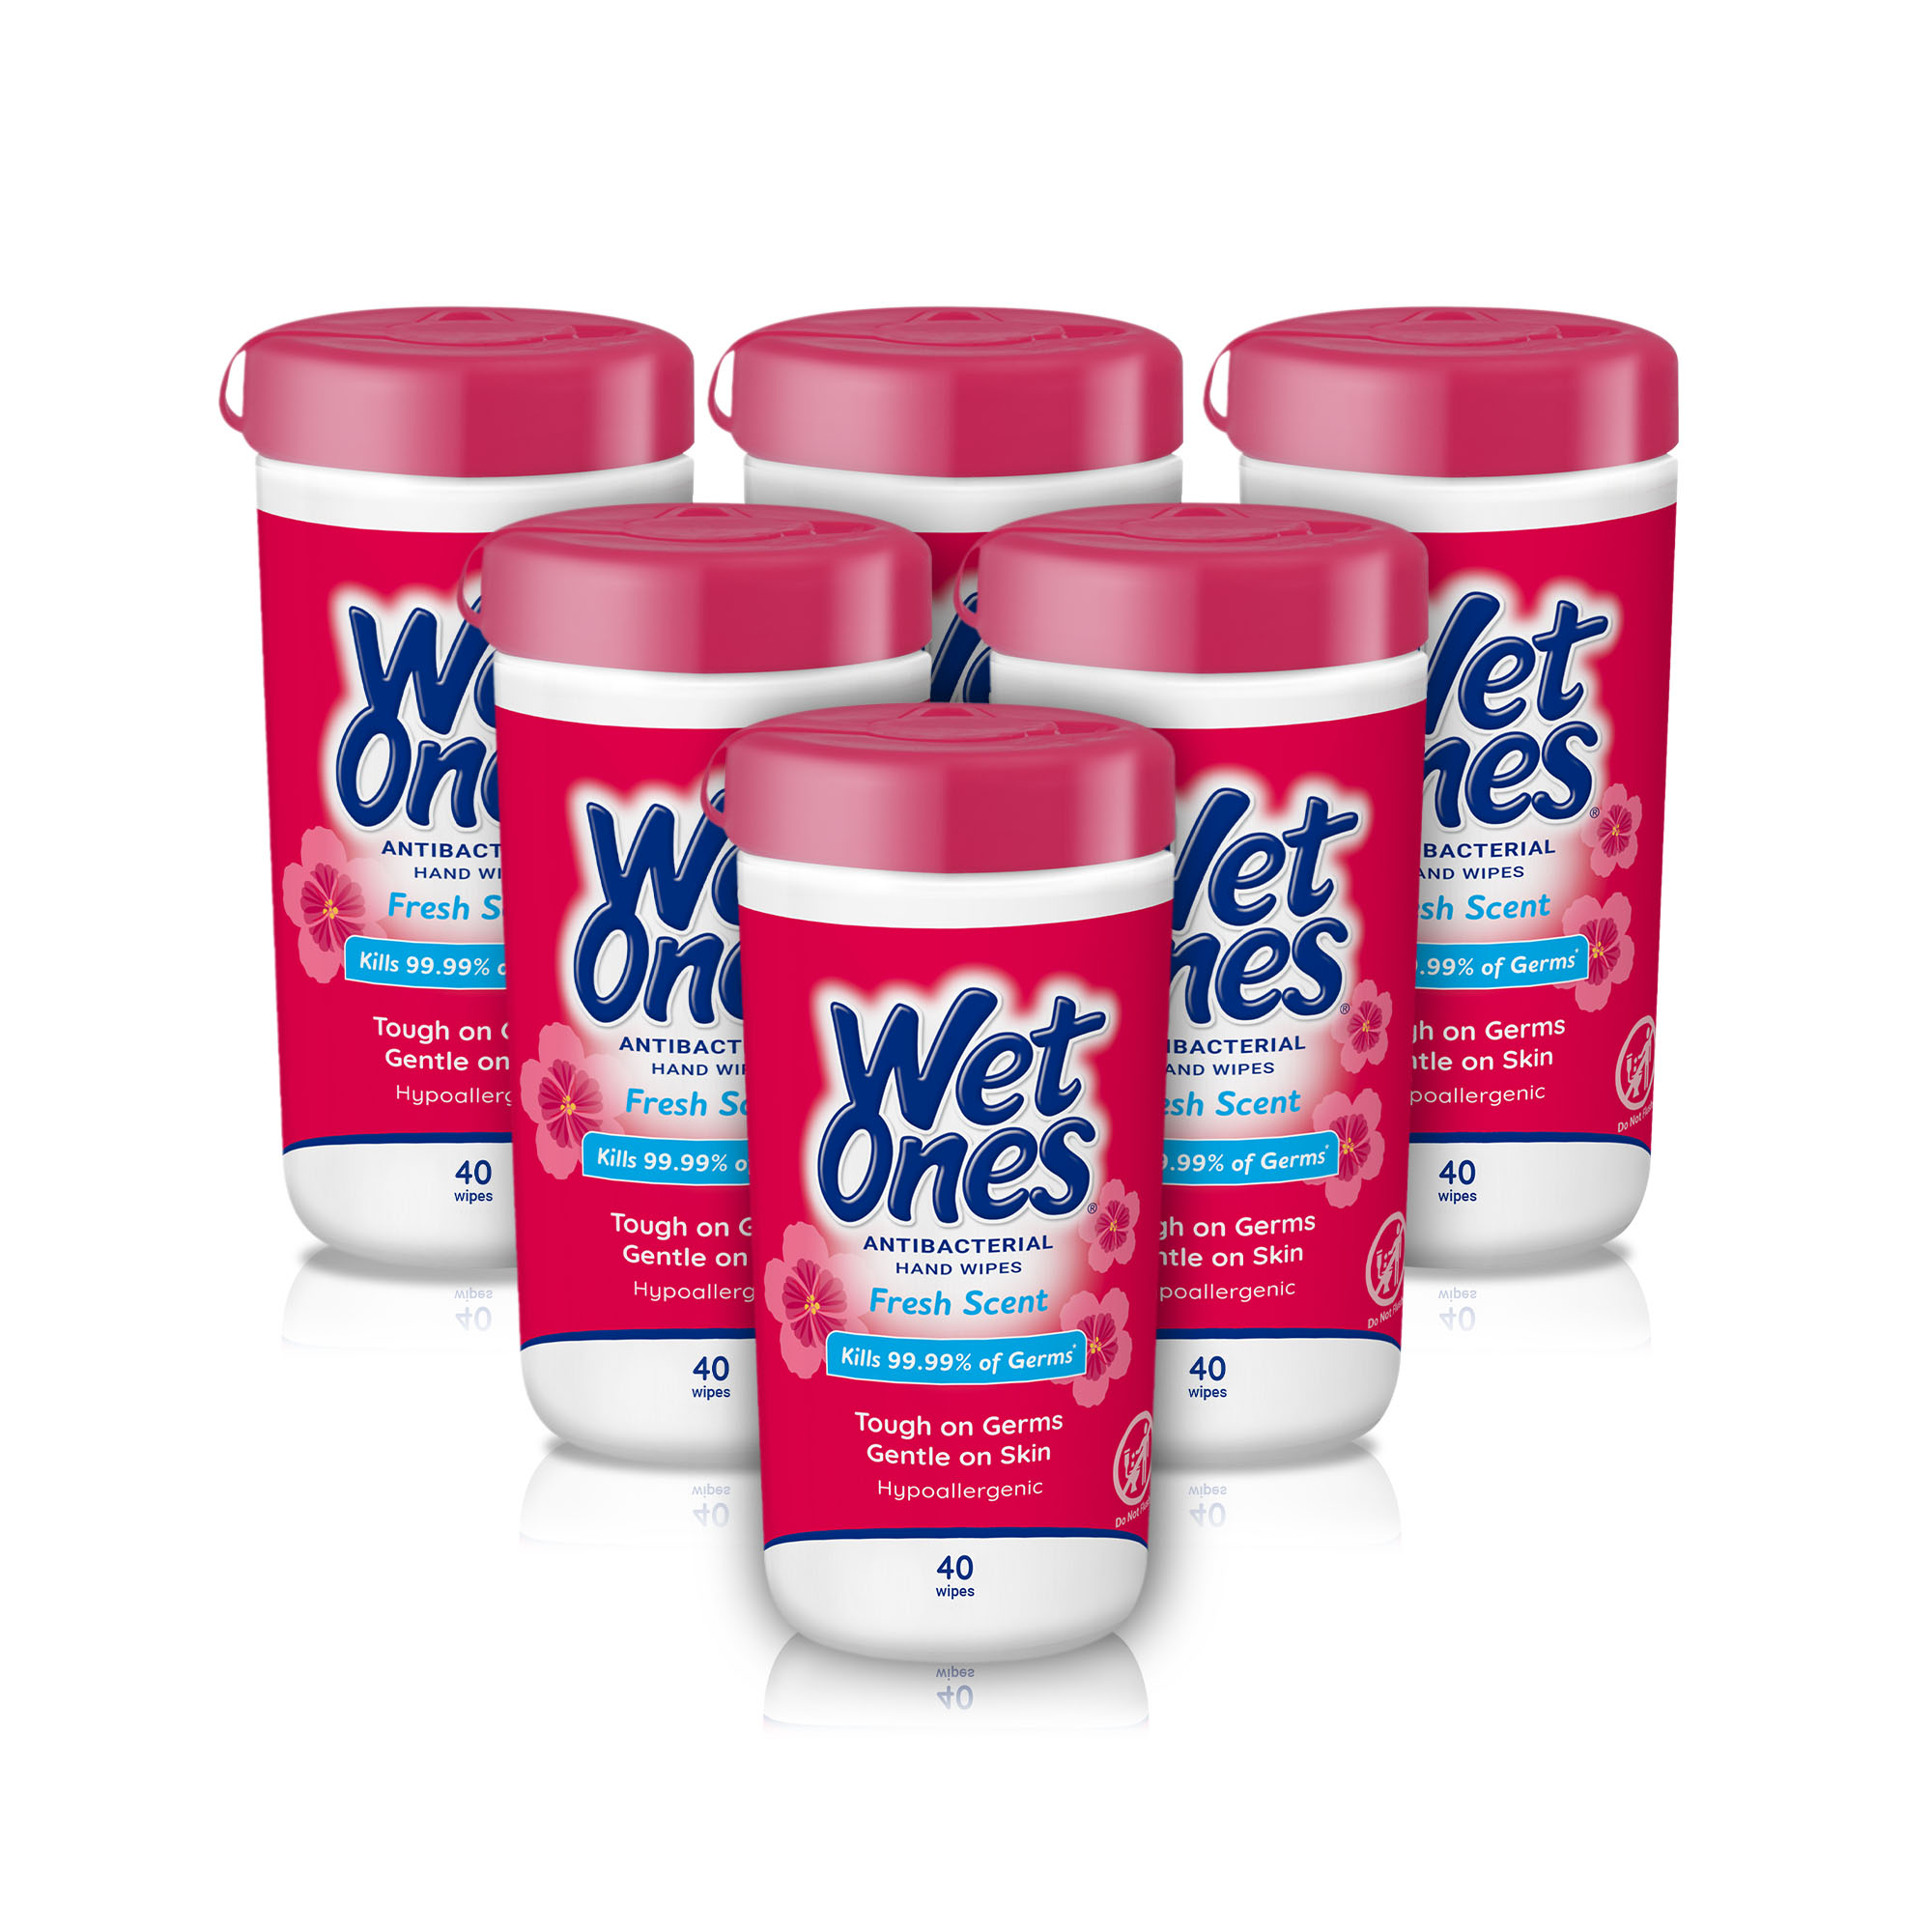 Wet Ones Antibacterial Hand Wipes Canister — Fresh Scent, 40 ct. Canister (6 pack) - image 1 of 11